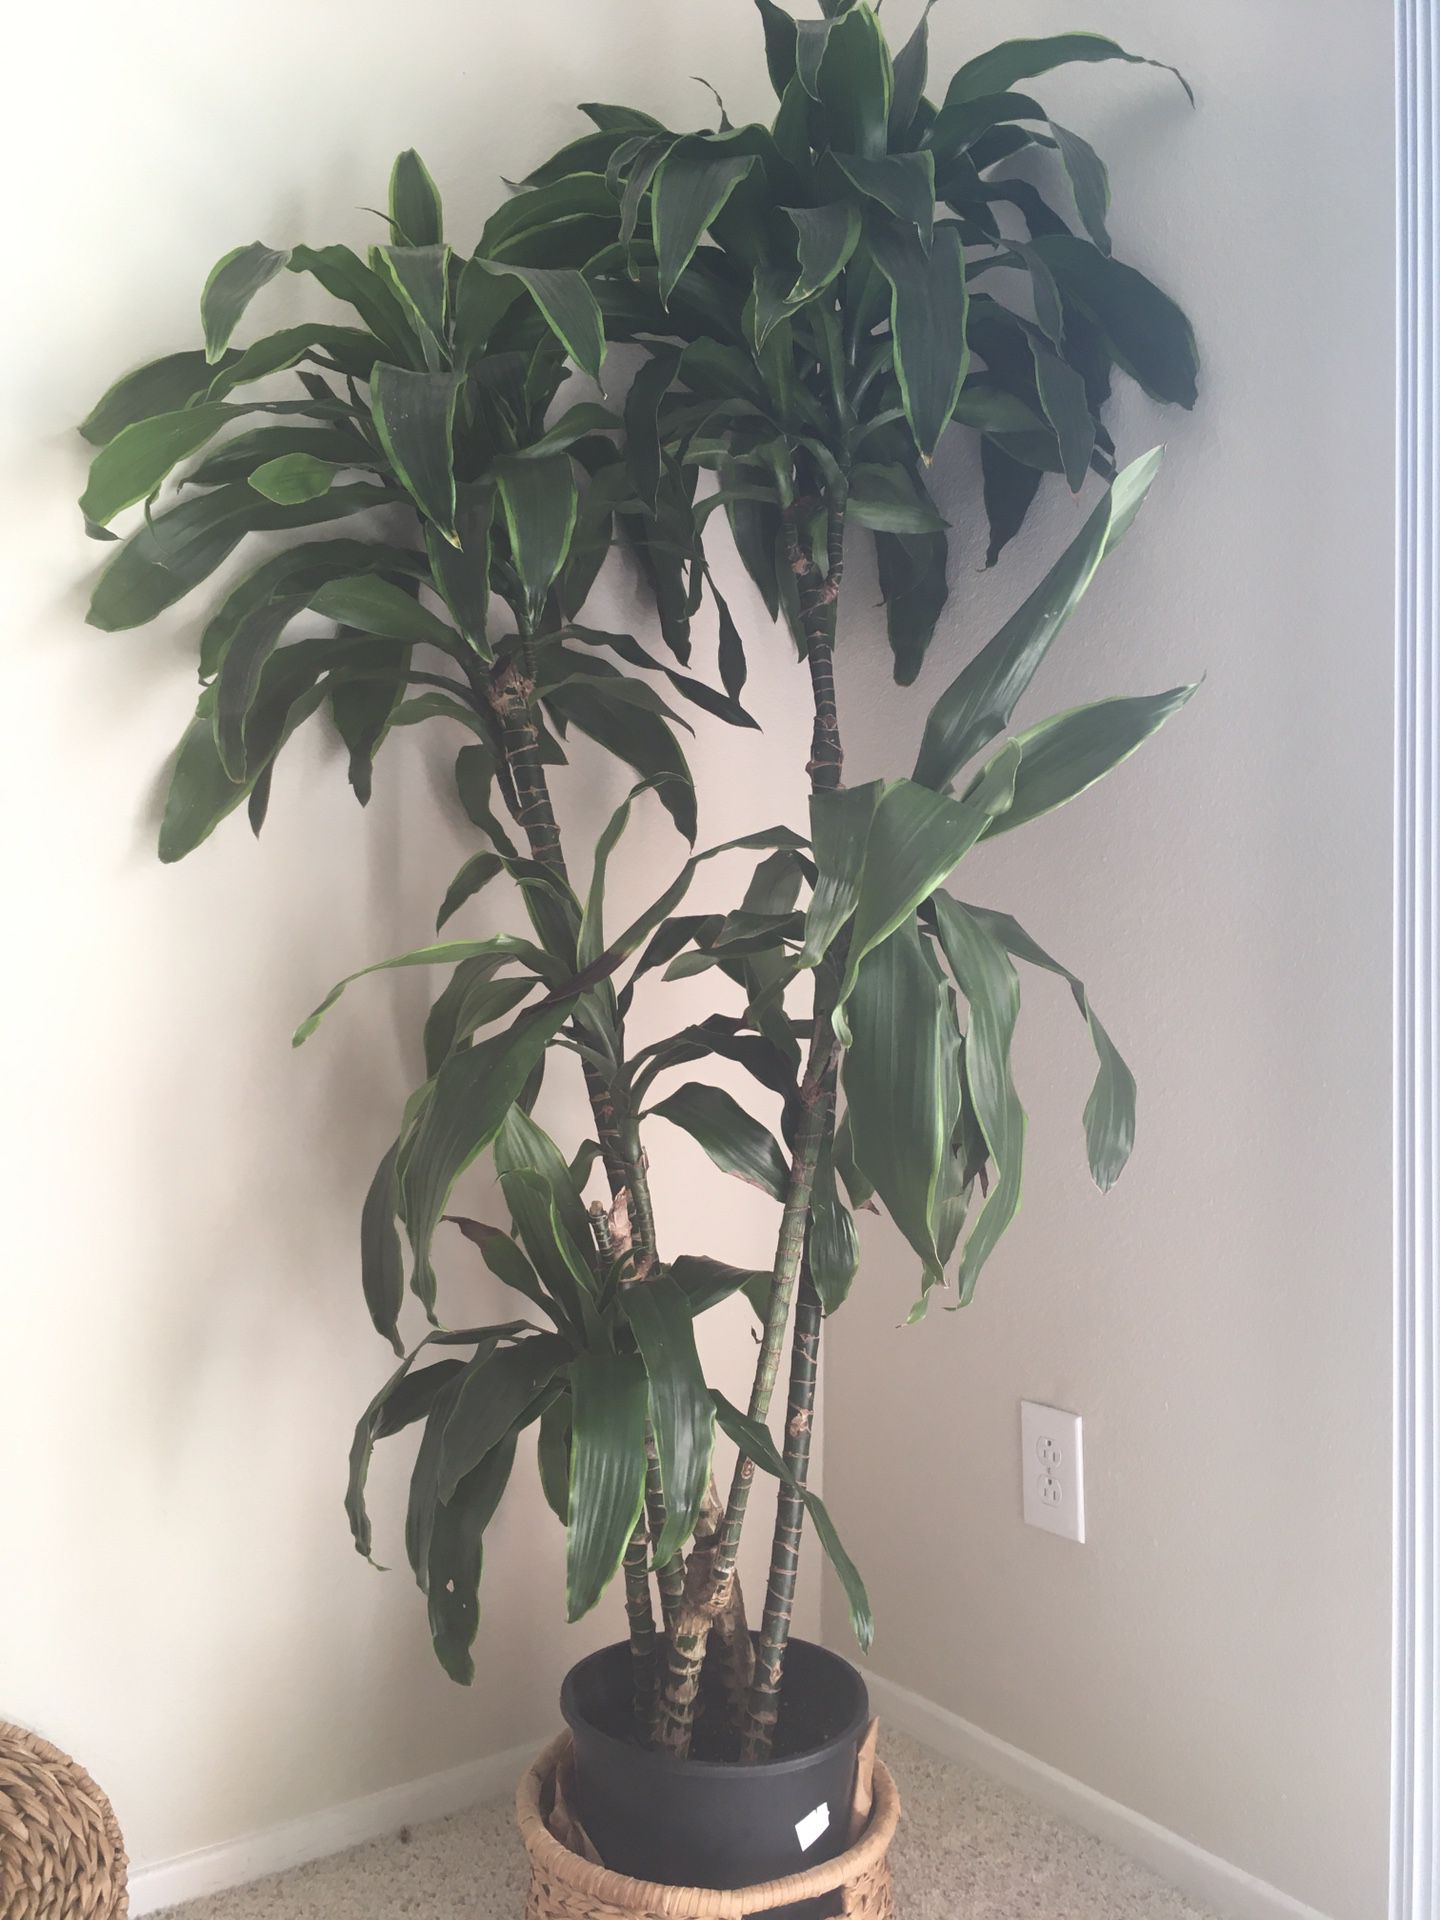 over 6 ft tall house plant (real)